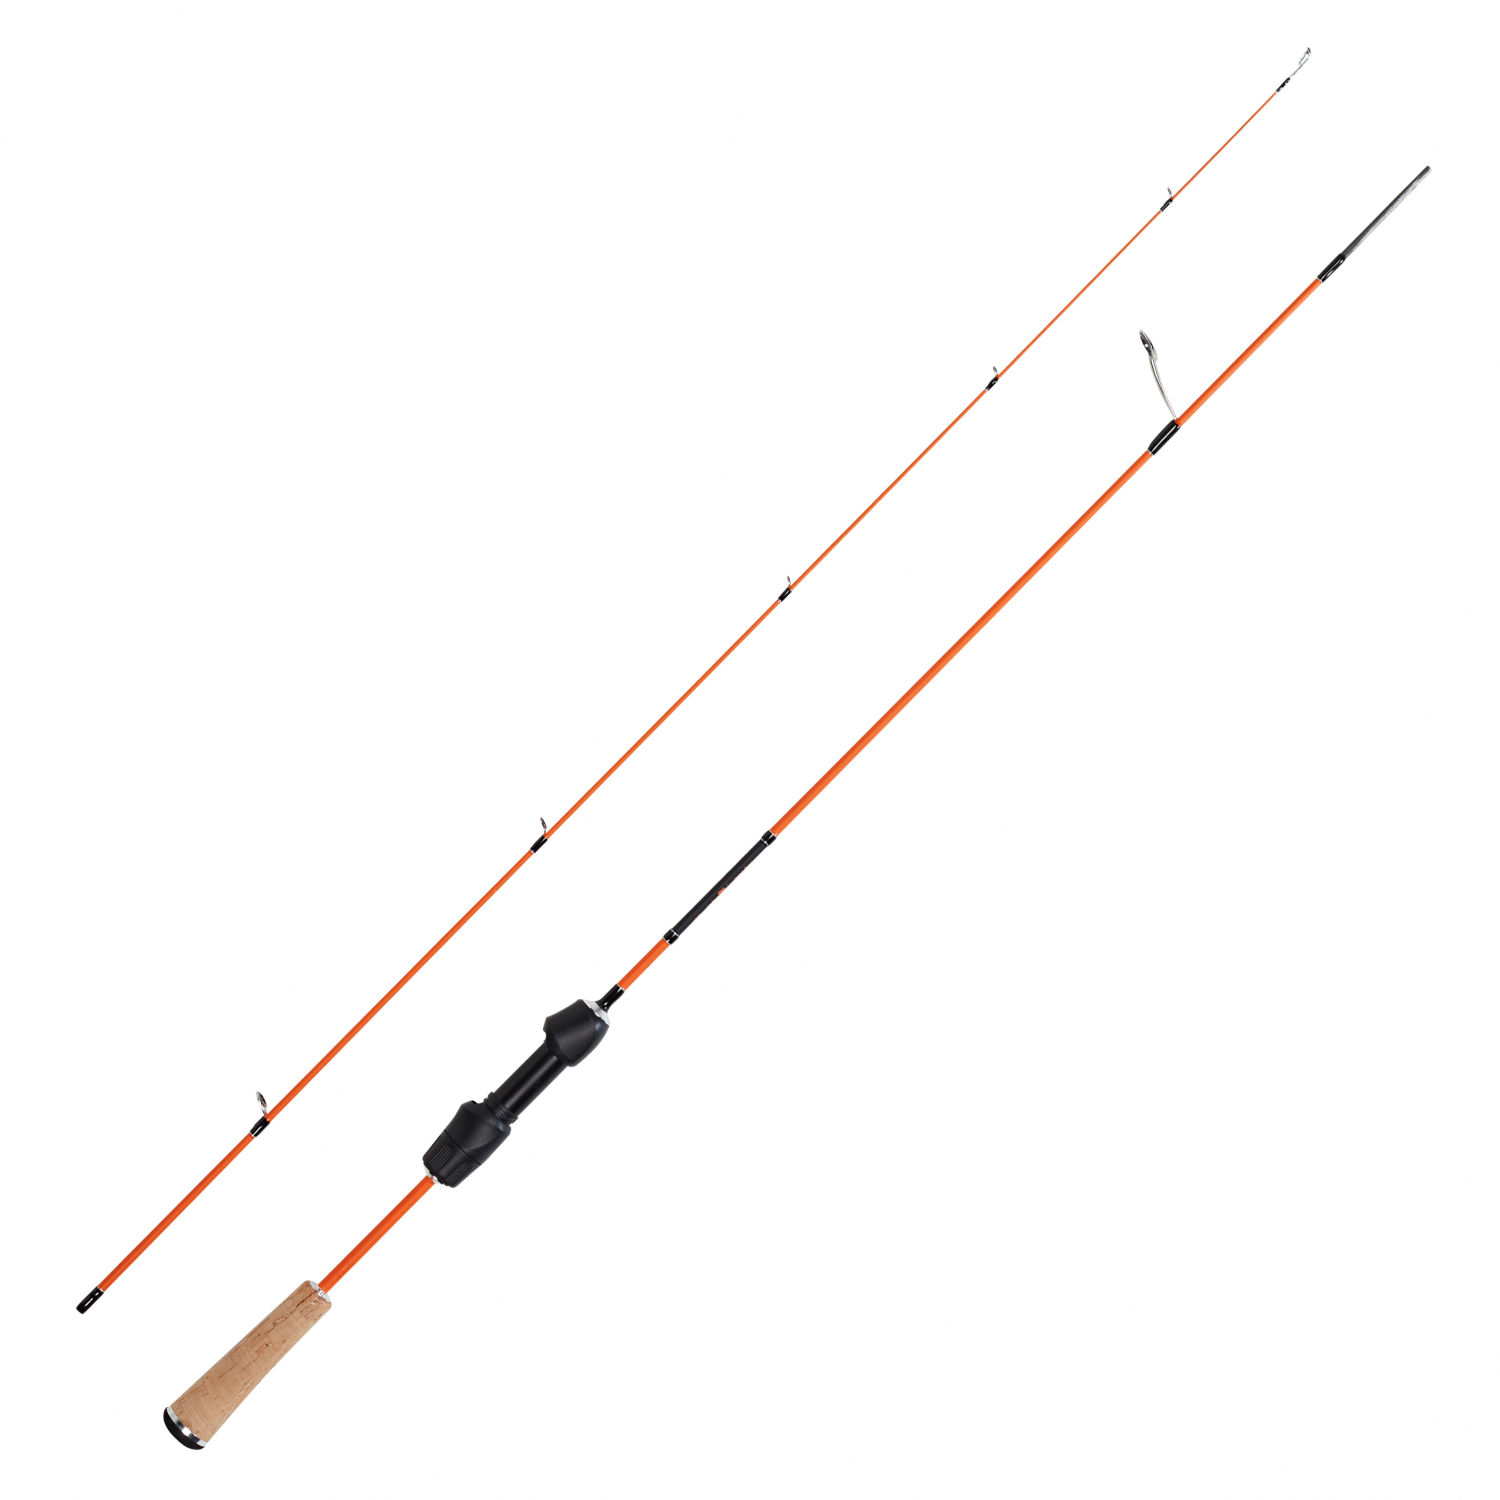 Kogha Spinning Rod Crazy Ant UL at low prices